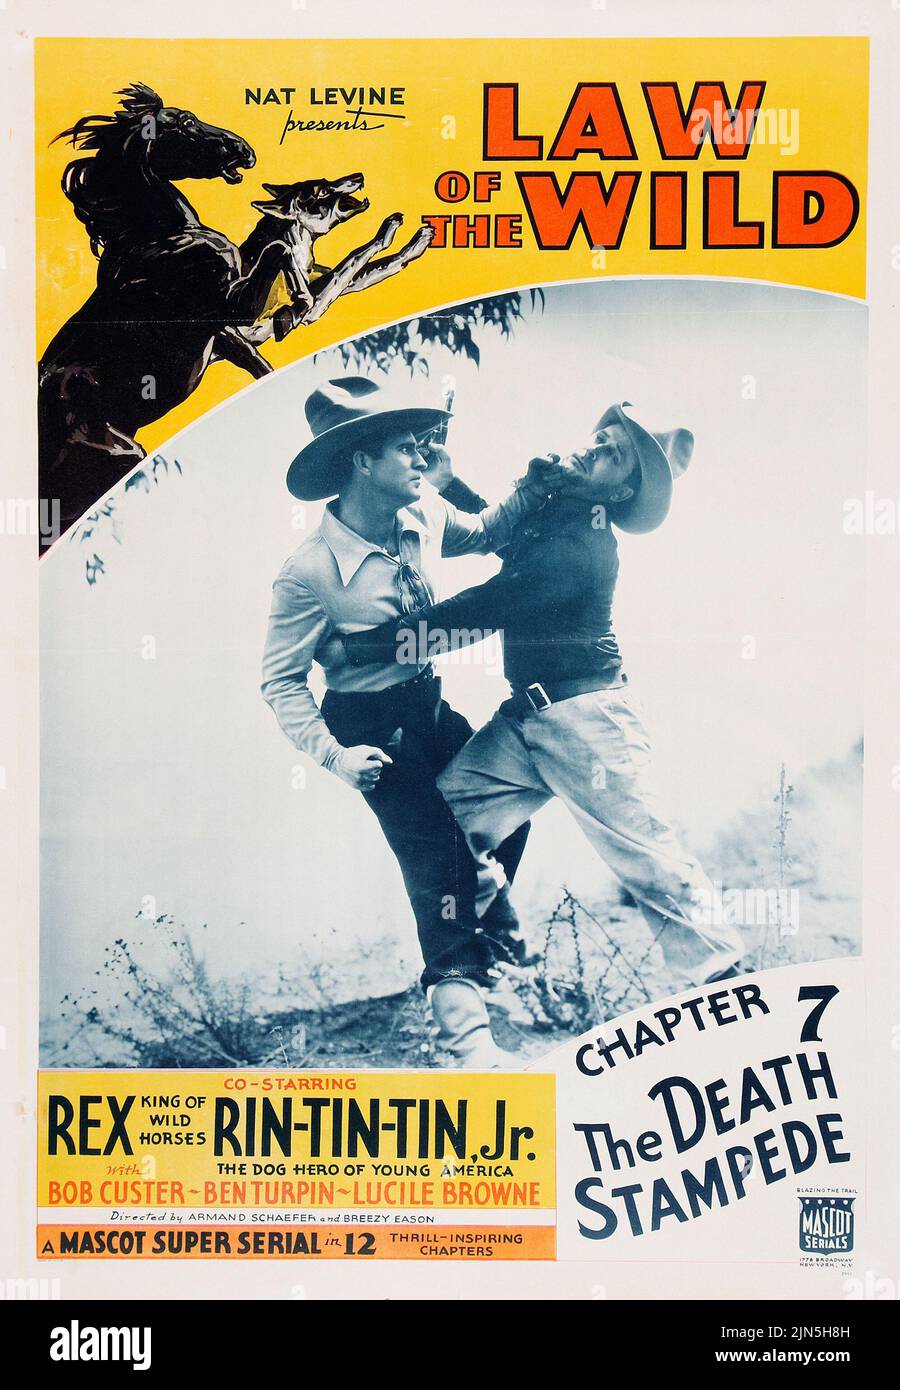 Vintage film poster - Rex King of Wild Horses and Rin-Tin-Tin - Law of the Wild (Mascot, 1934).  Chapter 7 - 'The Death Stampede.' Stock Photo